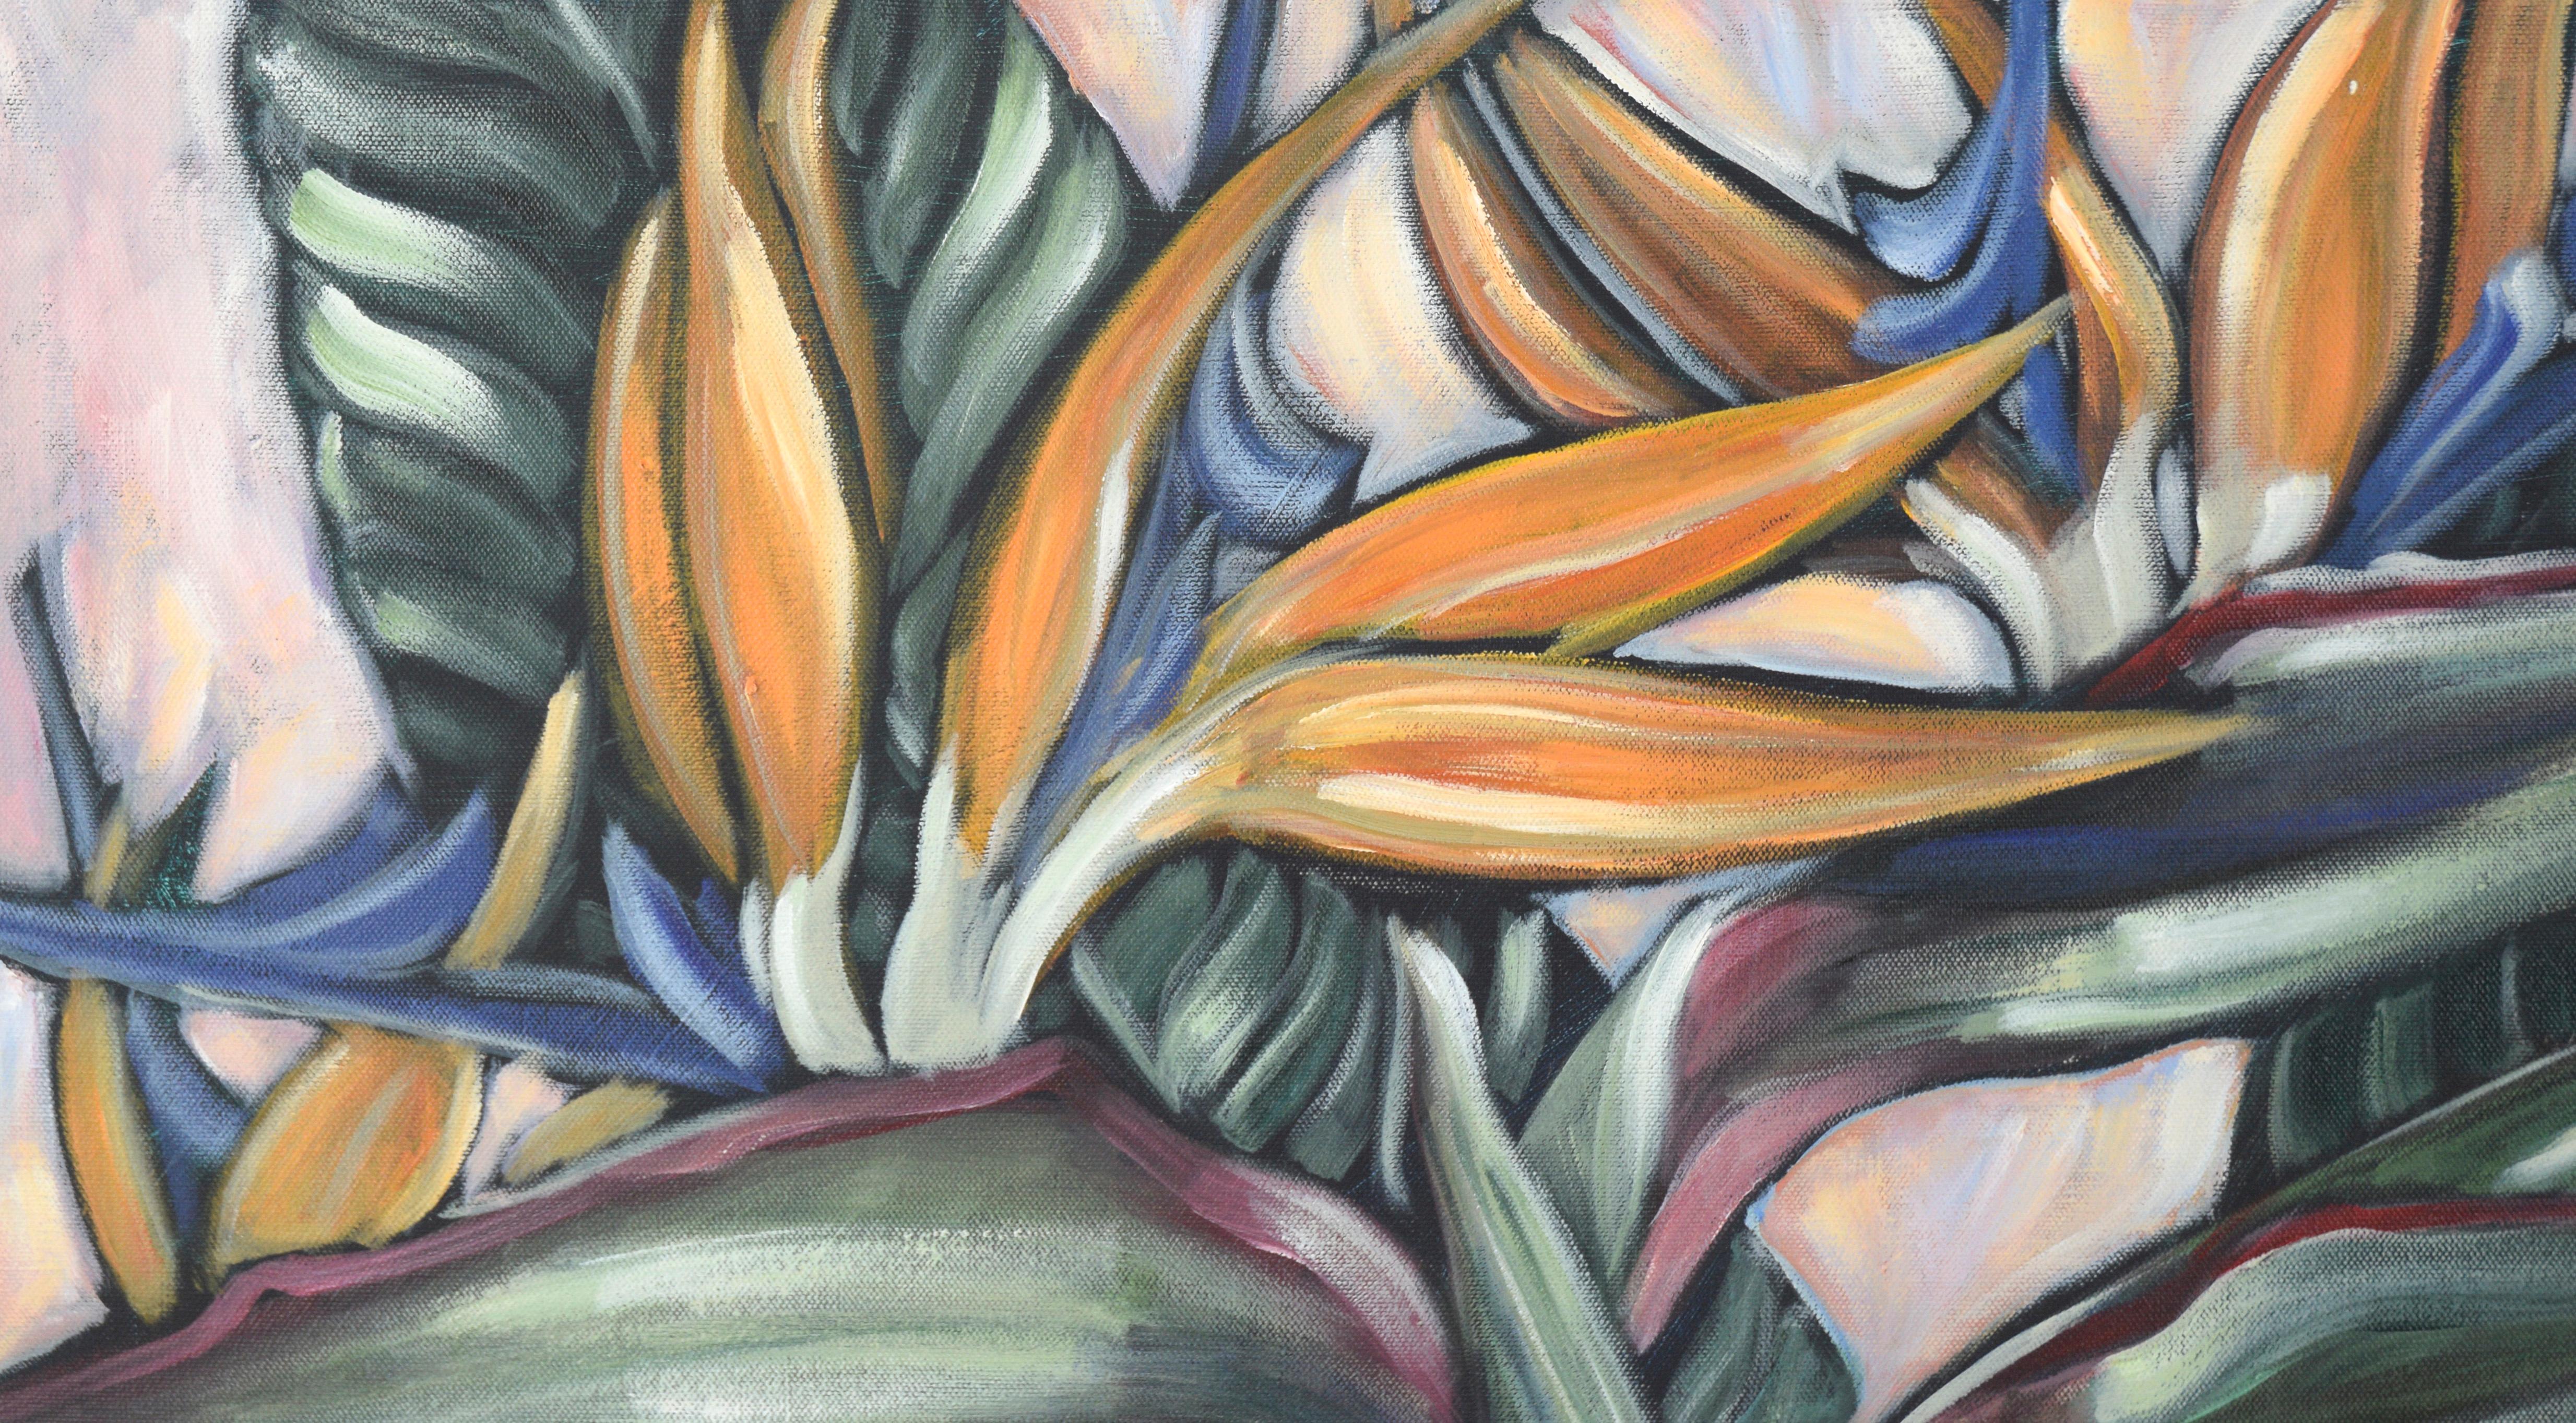 Modernist tropical flower still life of Birds of Paradise (Strelitzia) painting in acrylic on canvas —  “Five Birds”

Striking modernist style still life of tropical Bird of Paradise by Helen Evensen (American, 20th Century), 2000. Several Birds of